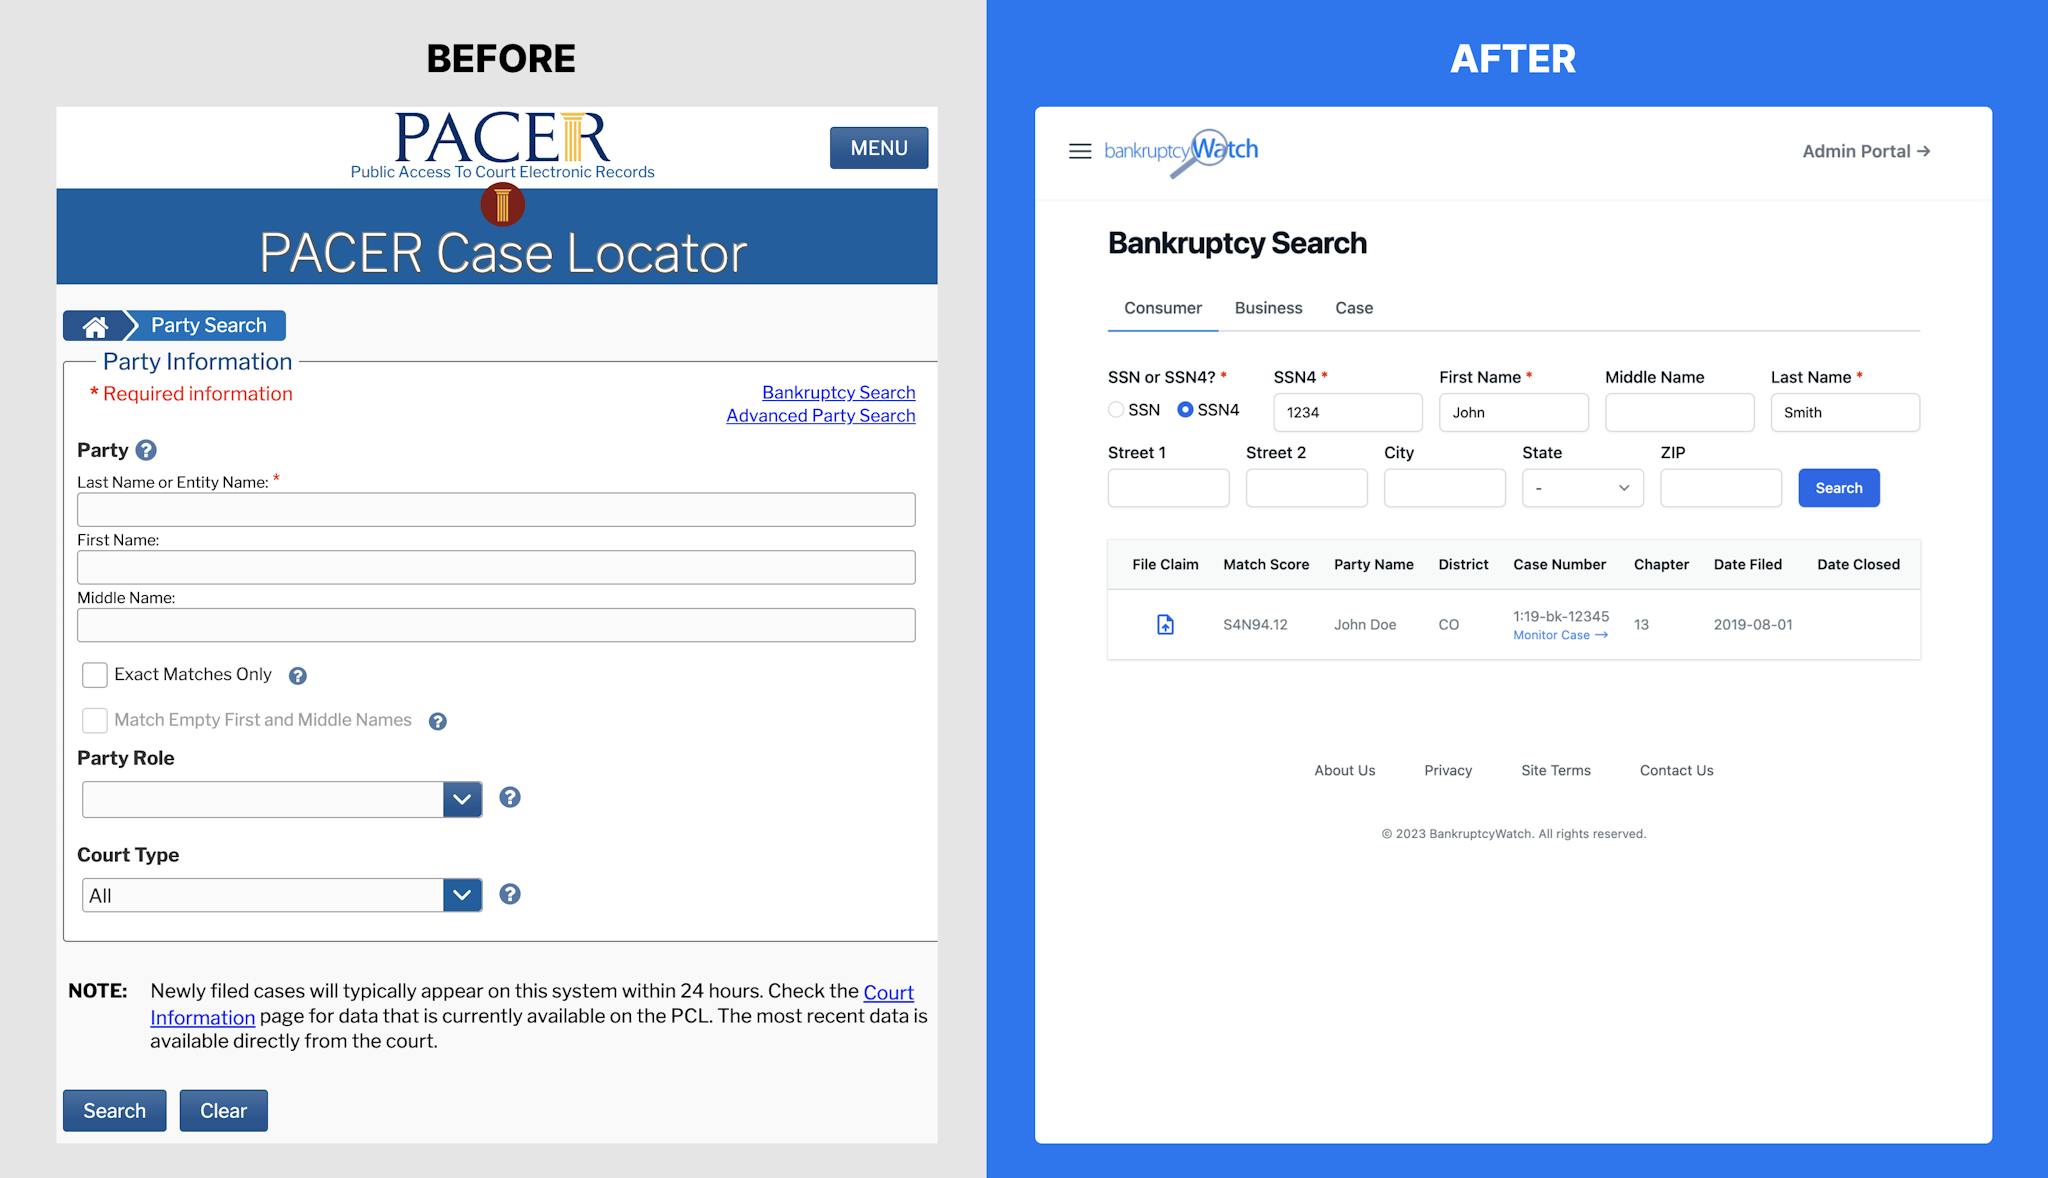 Before and after case locator makeover screenshots